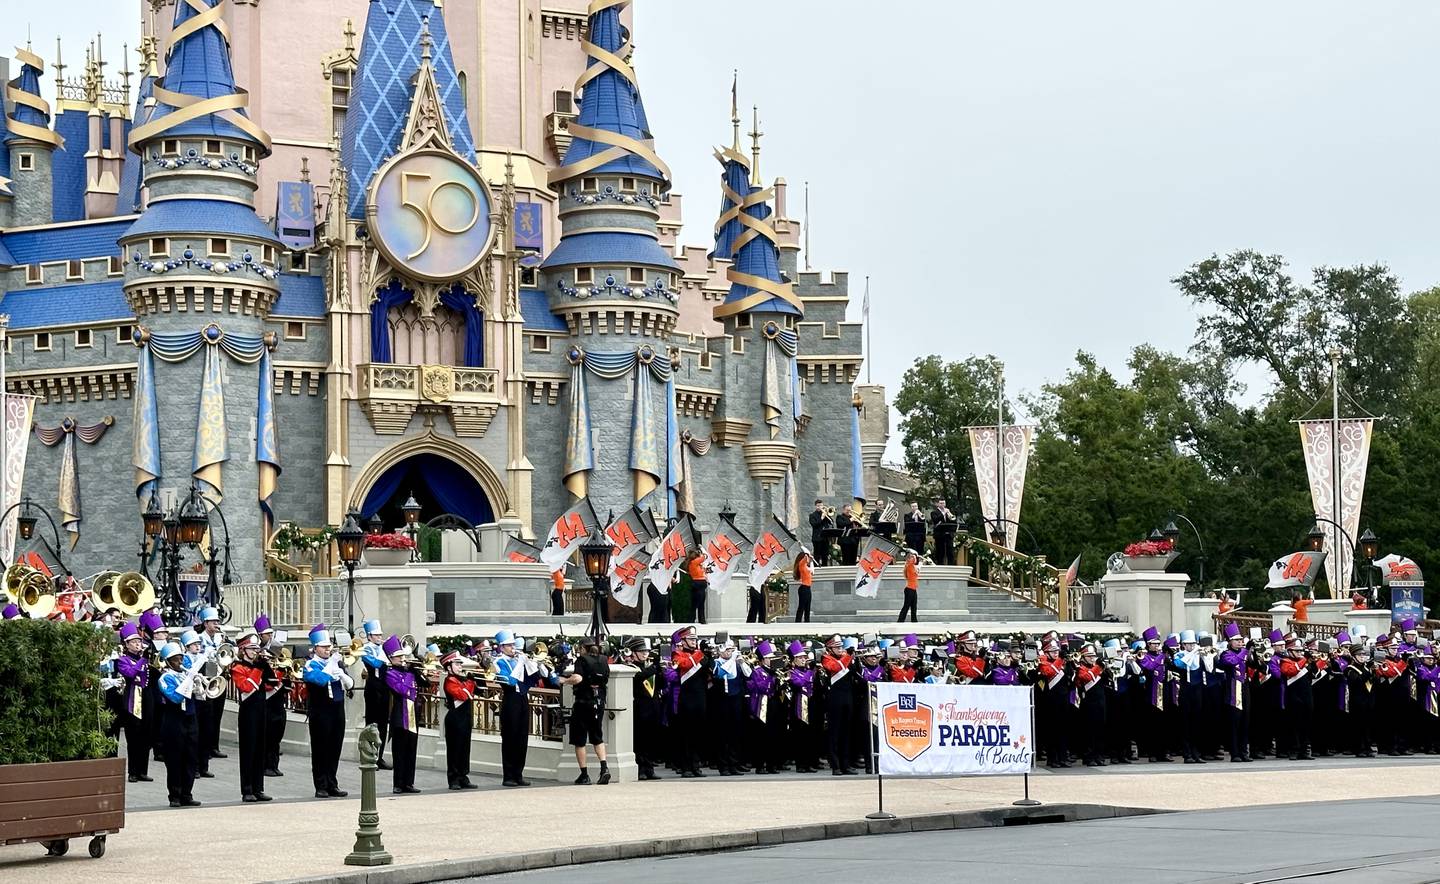 Wych said the band was given five pieces to perform, including the “Mickey Mouse March” on the castle stage, and the arrangements were specifically written to accompany the brass quintet.